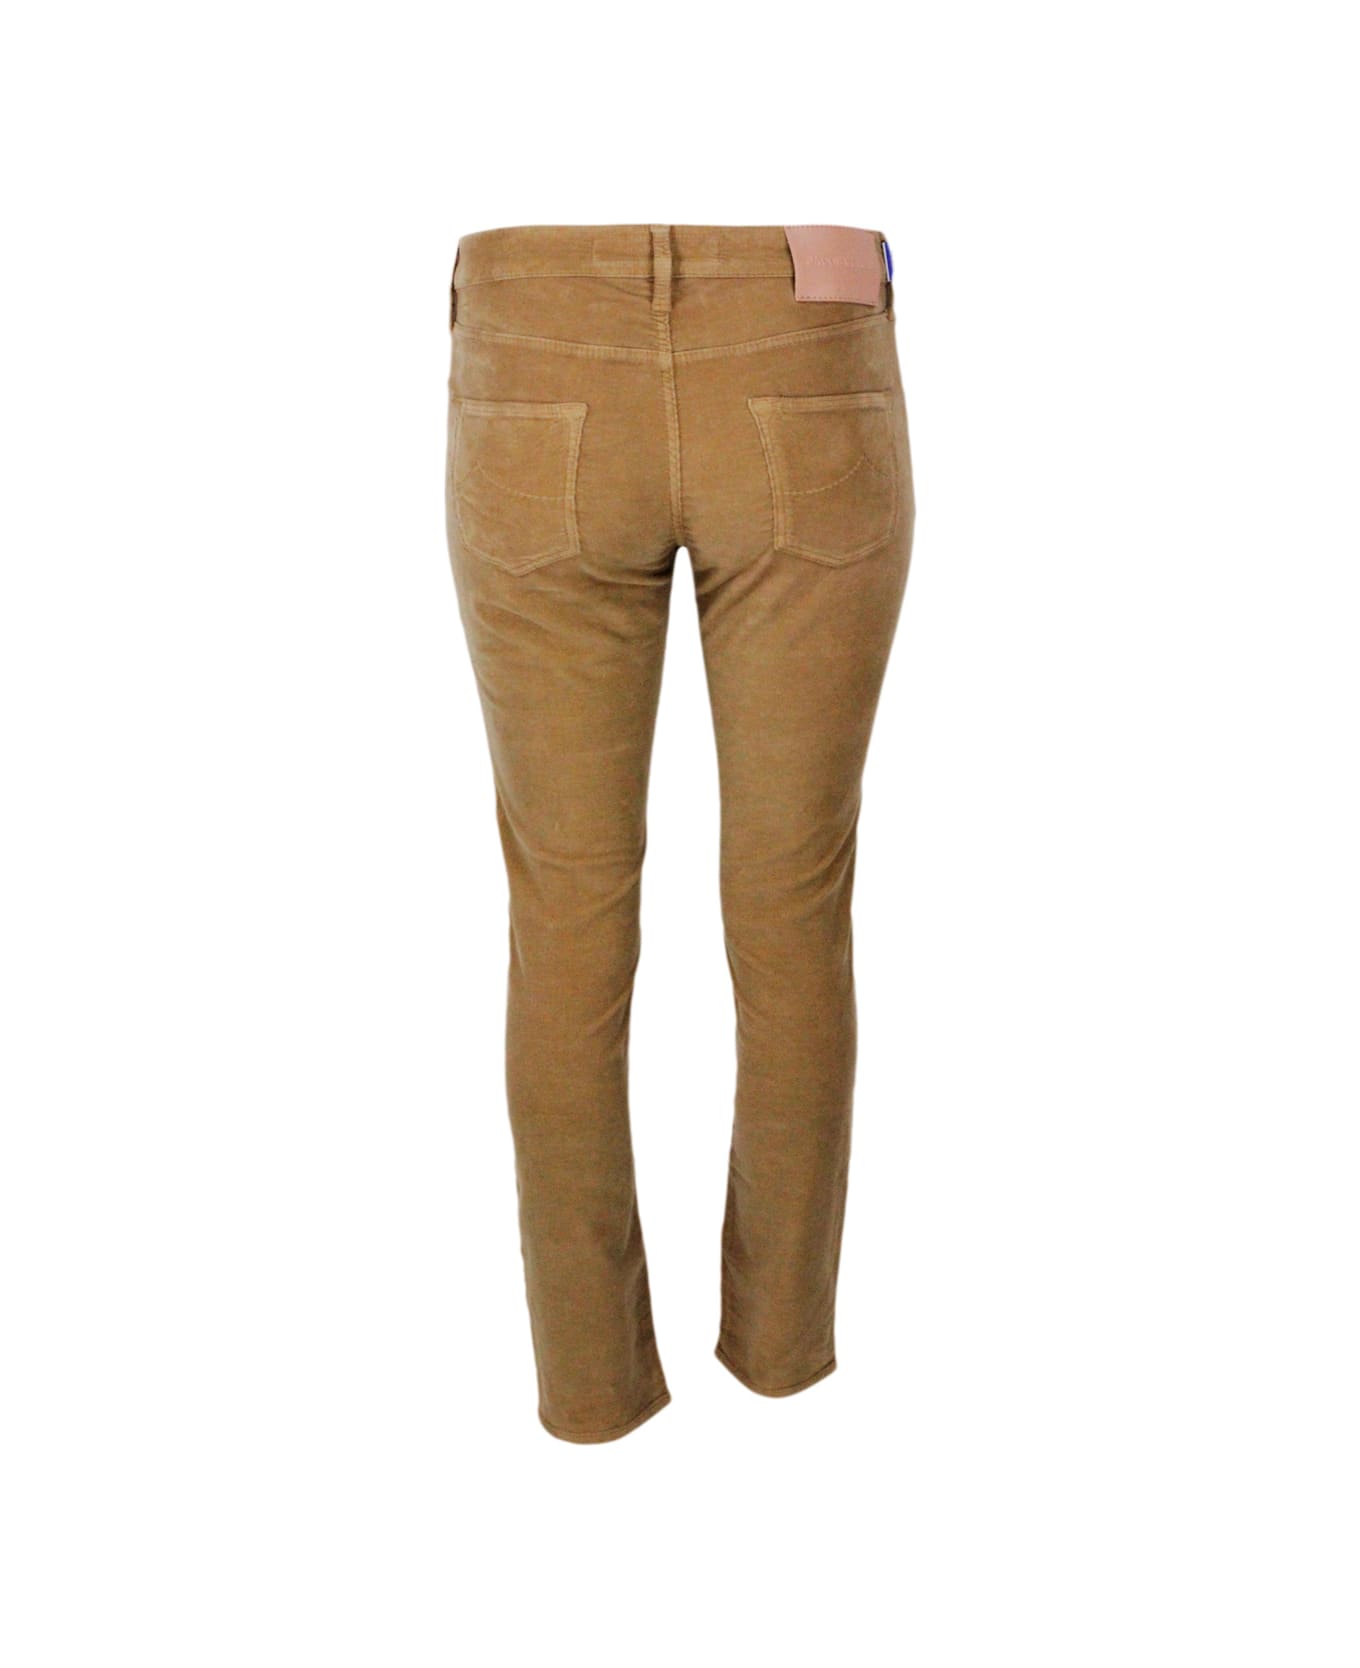 Jacob Cohen Kimberly Cigarette Cut Trousers In Soft 1000 Striped Stretch Velvet With 5 Pockets W/zip And Button Closure. Skinny Regular Waist. Velvet Label - Camel